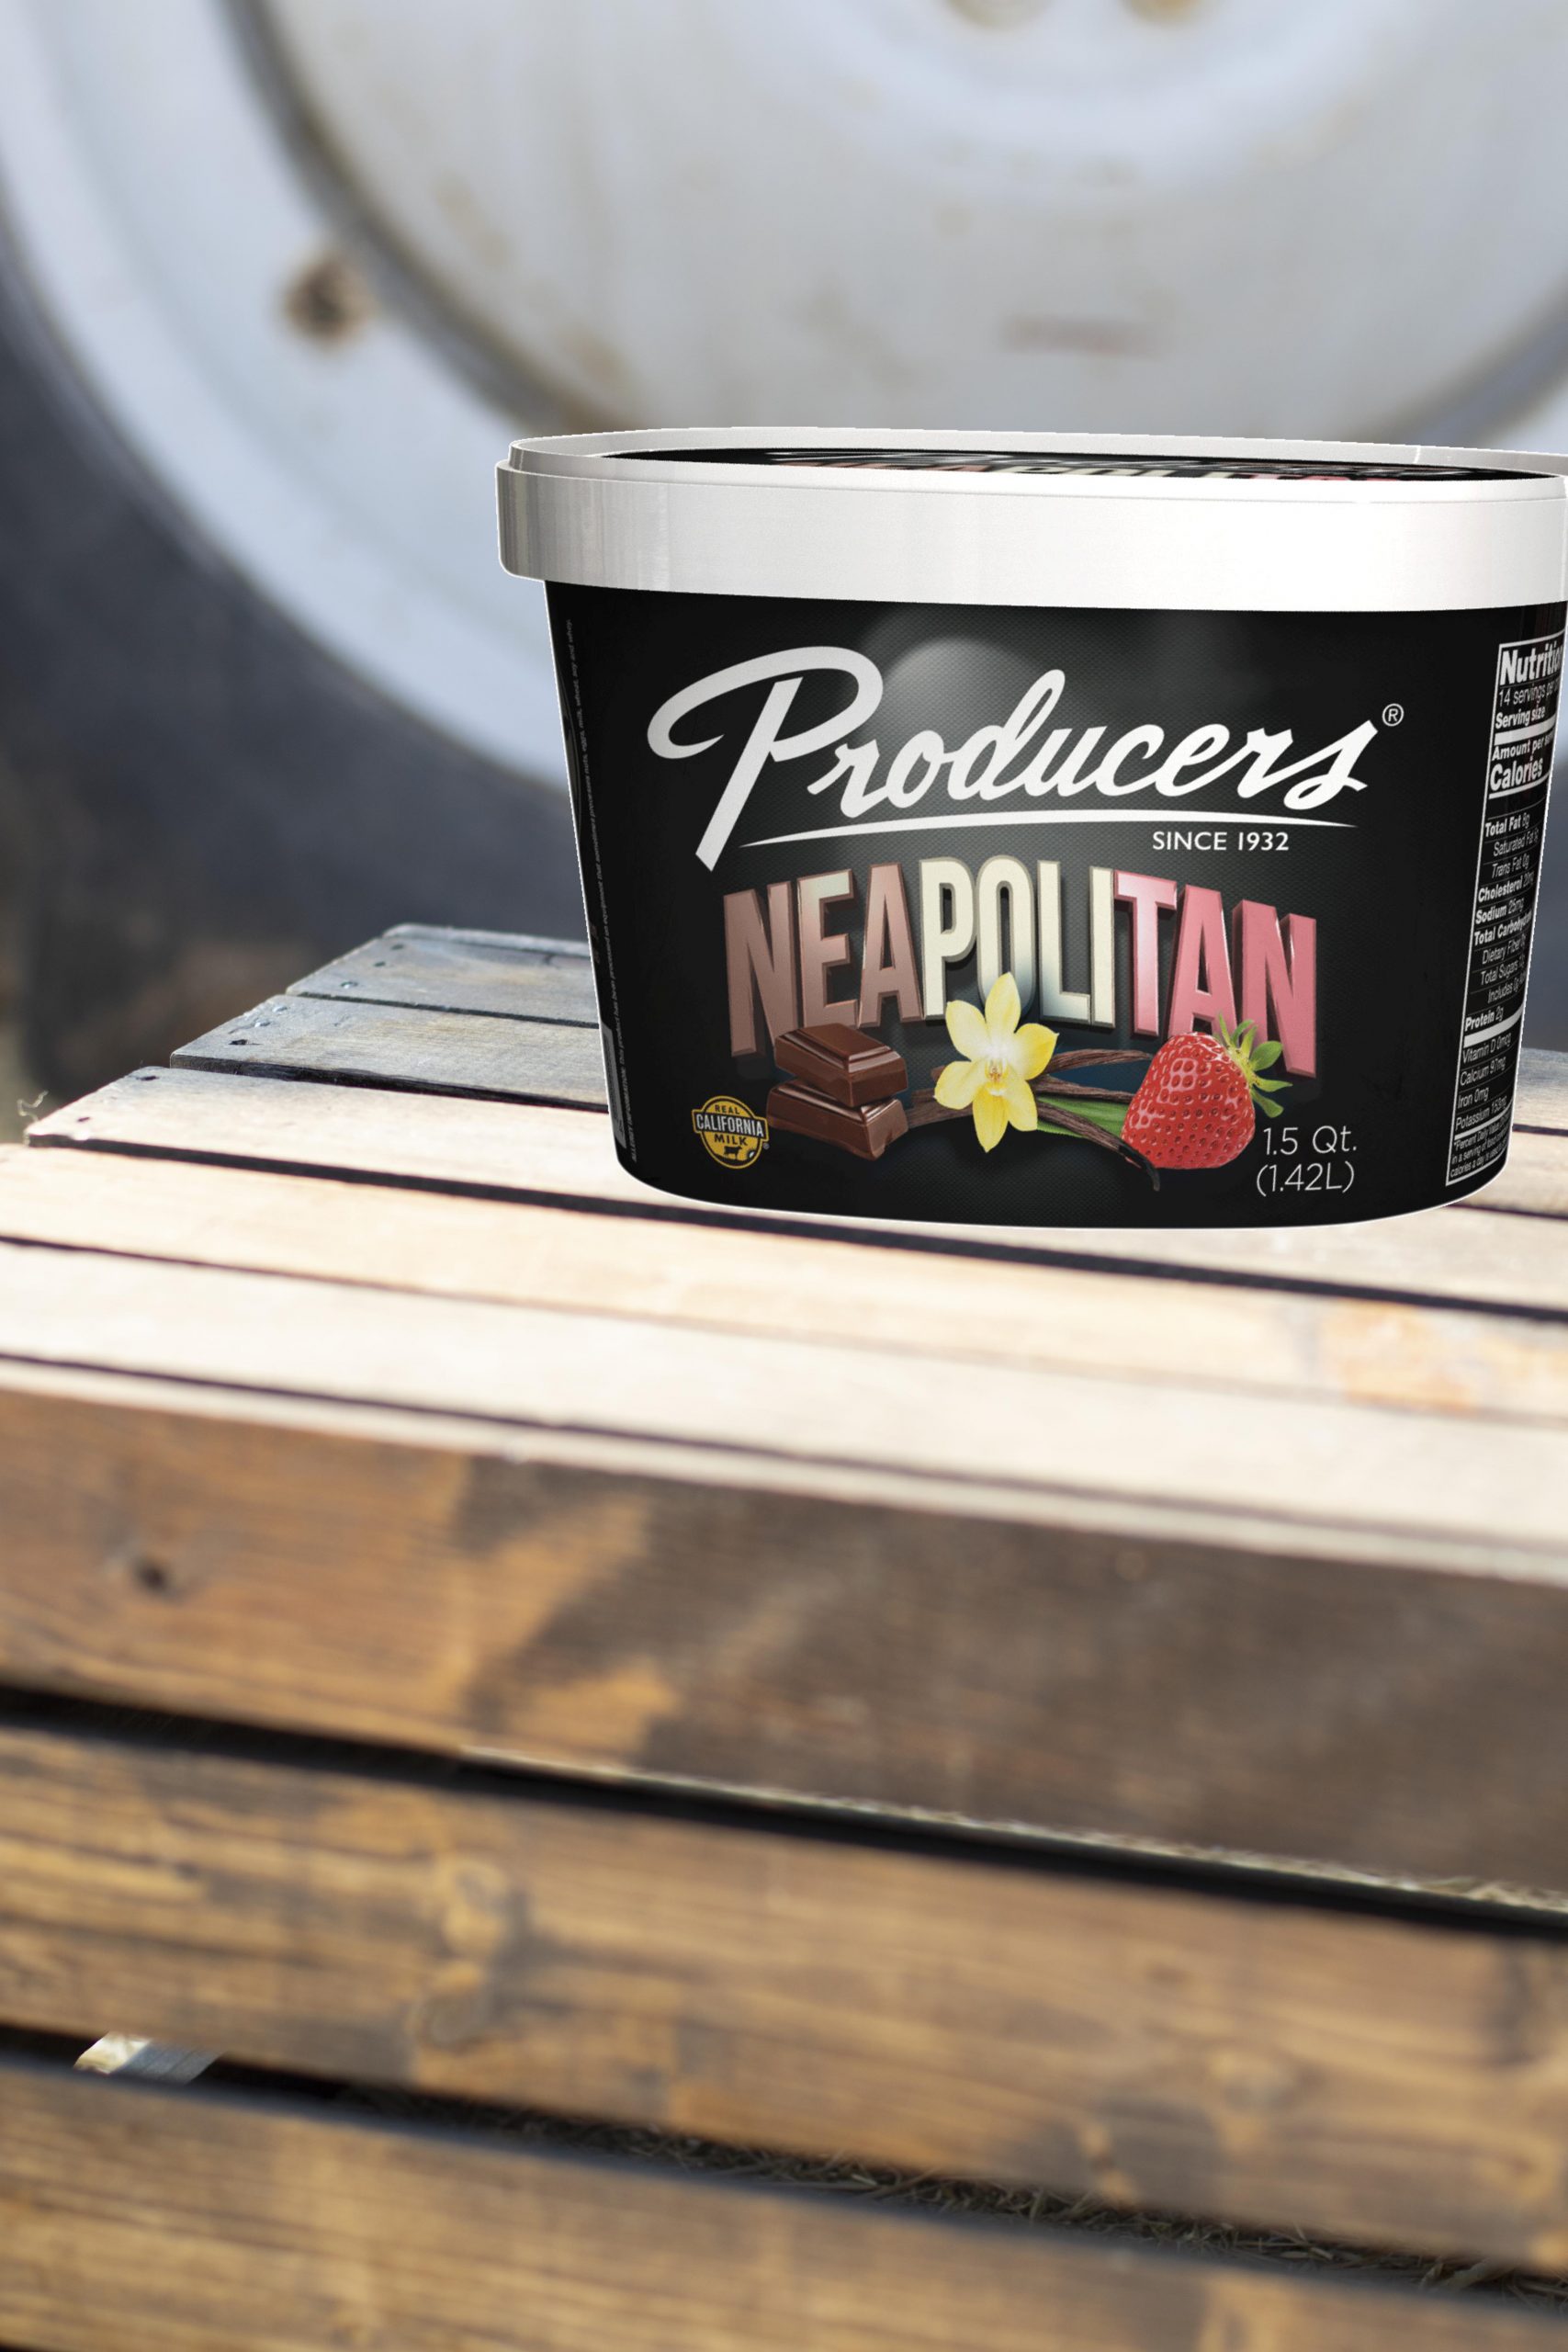 Neapolitan Producers Ice Cream sitting on wood in front of a tractor.